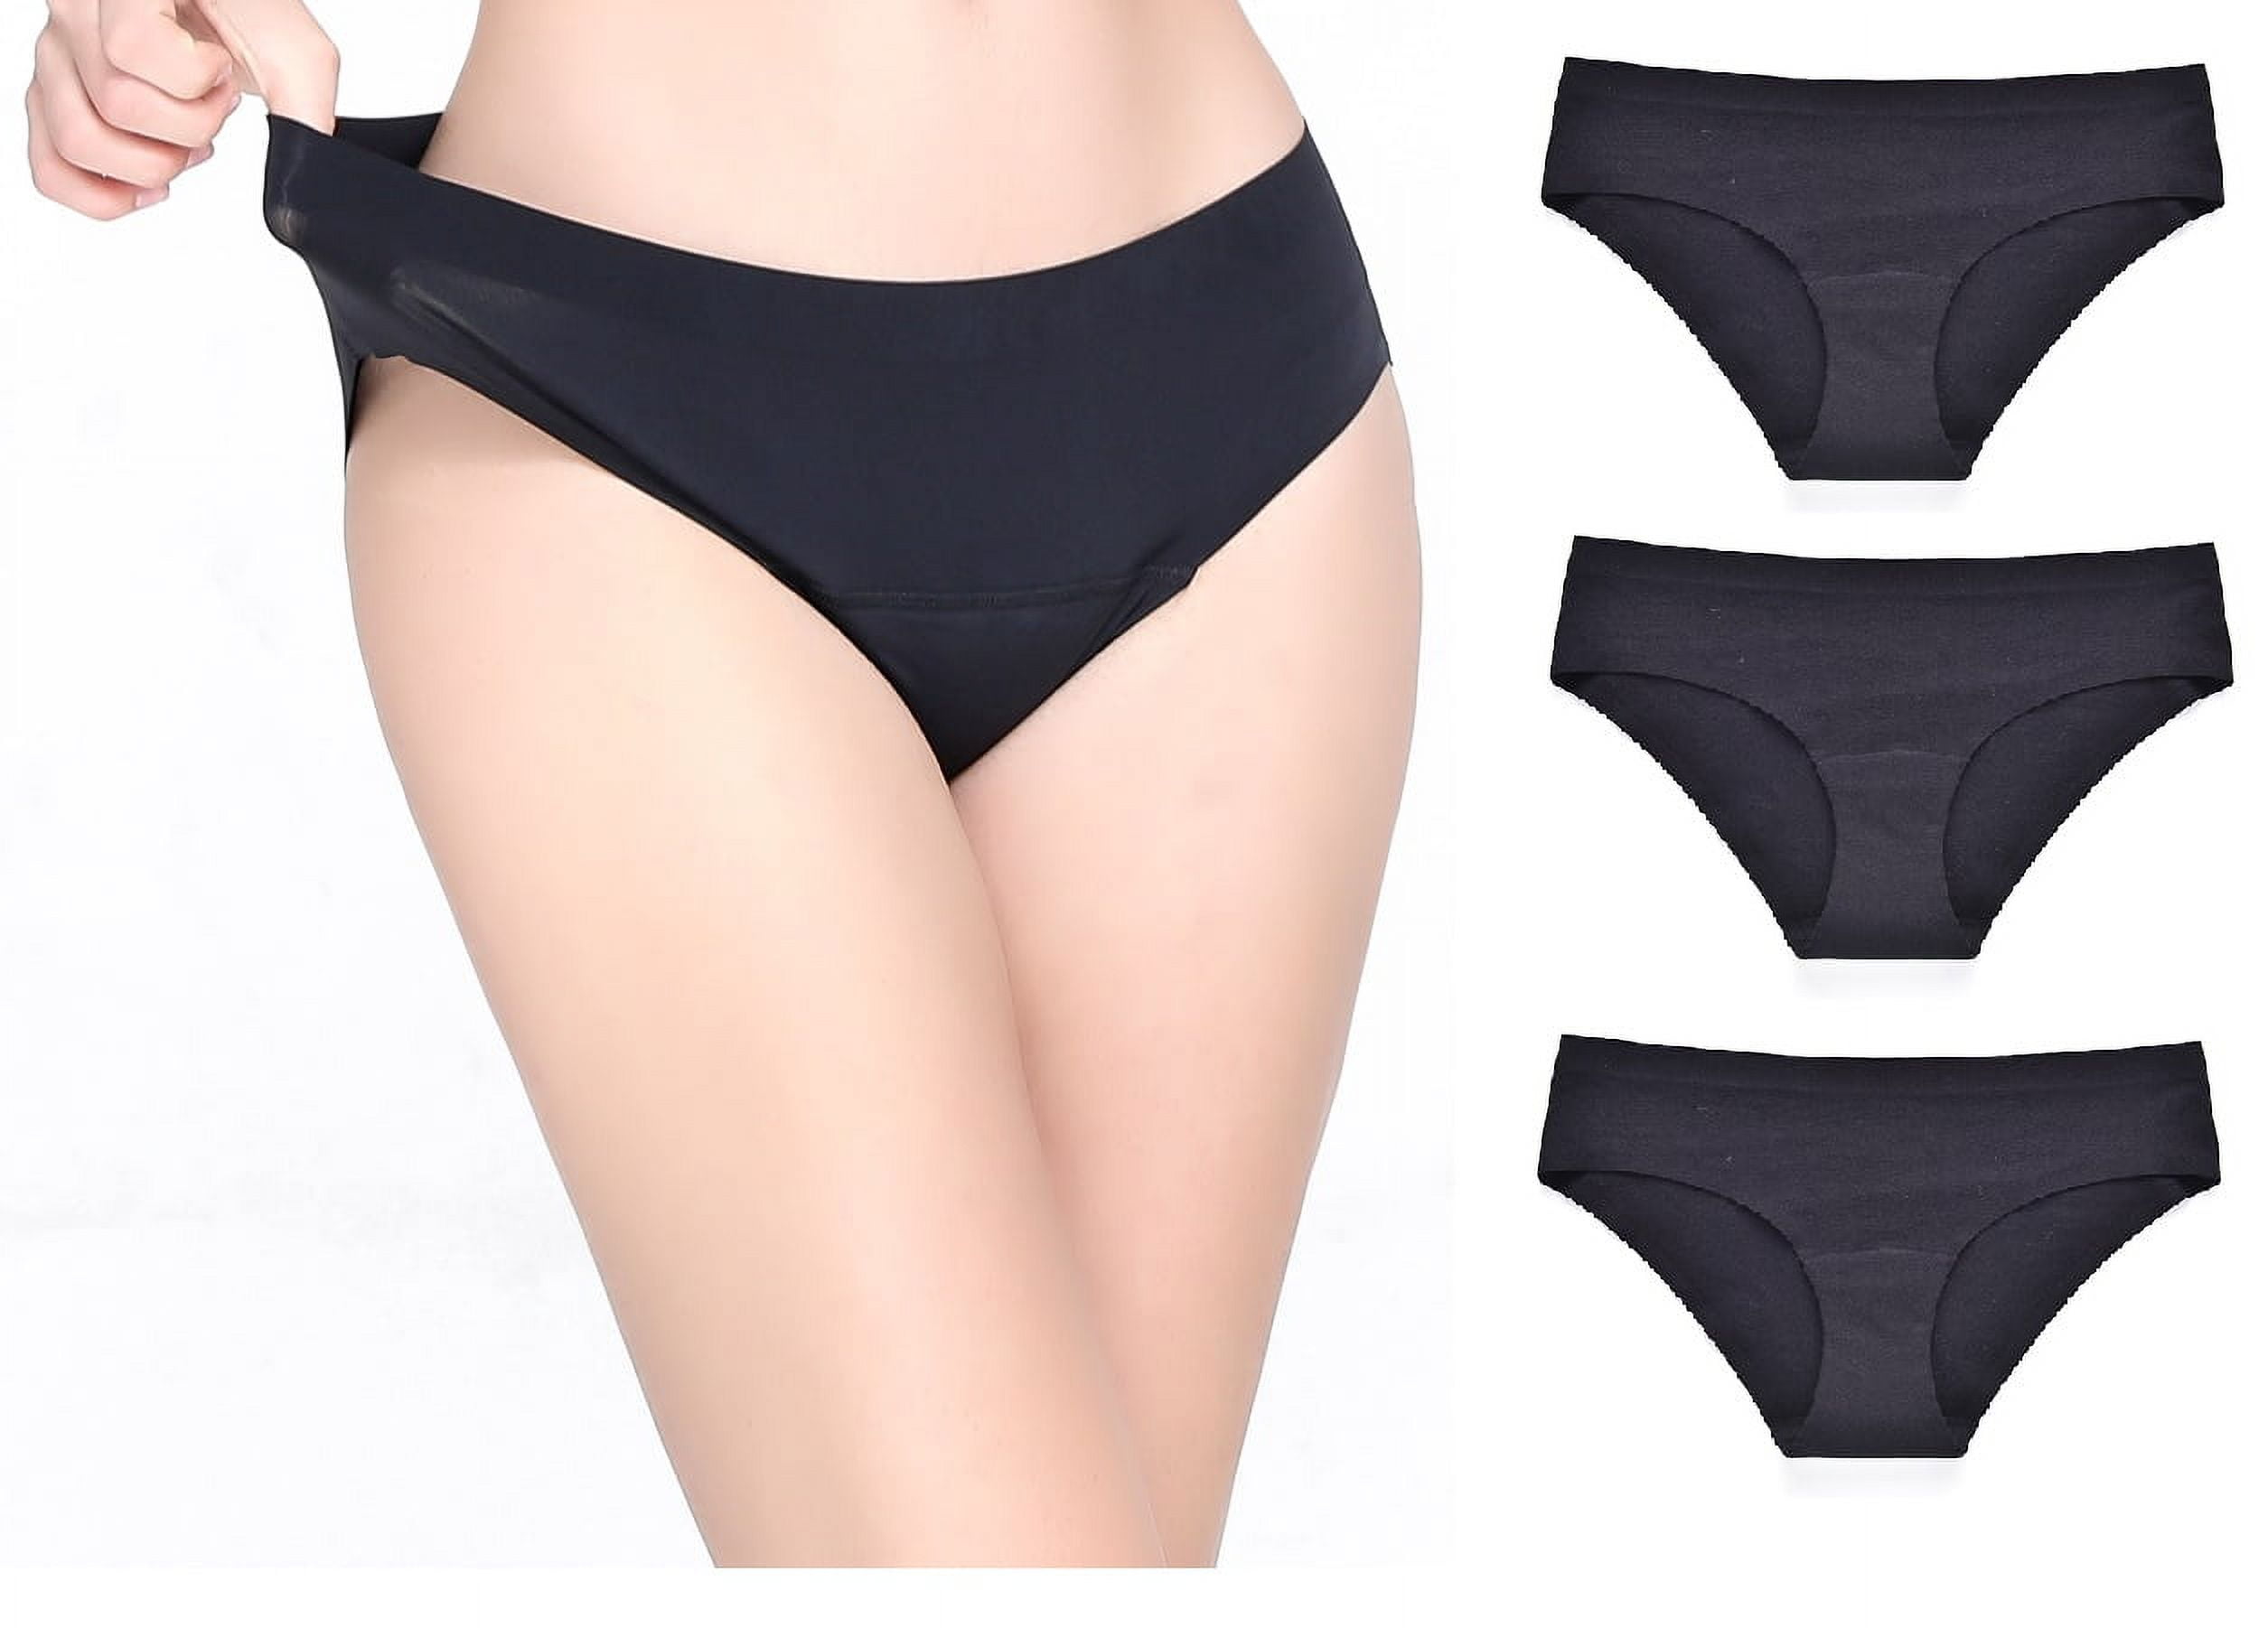 Teen period-proof products  Leak-proof period underwear